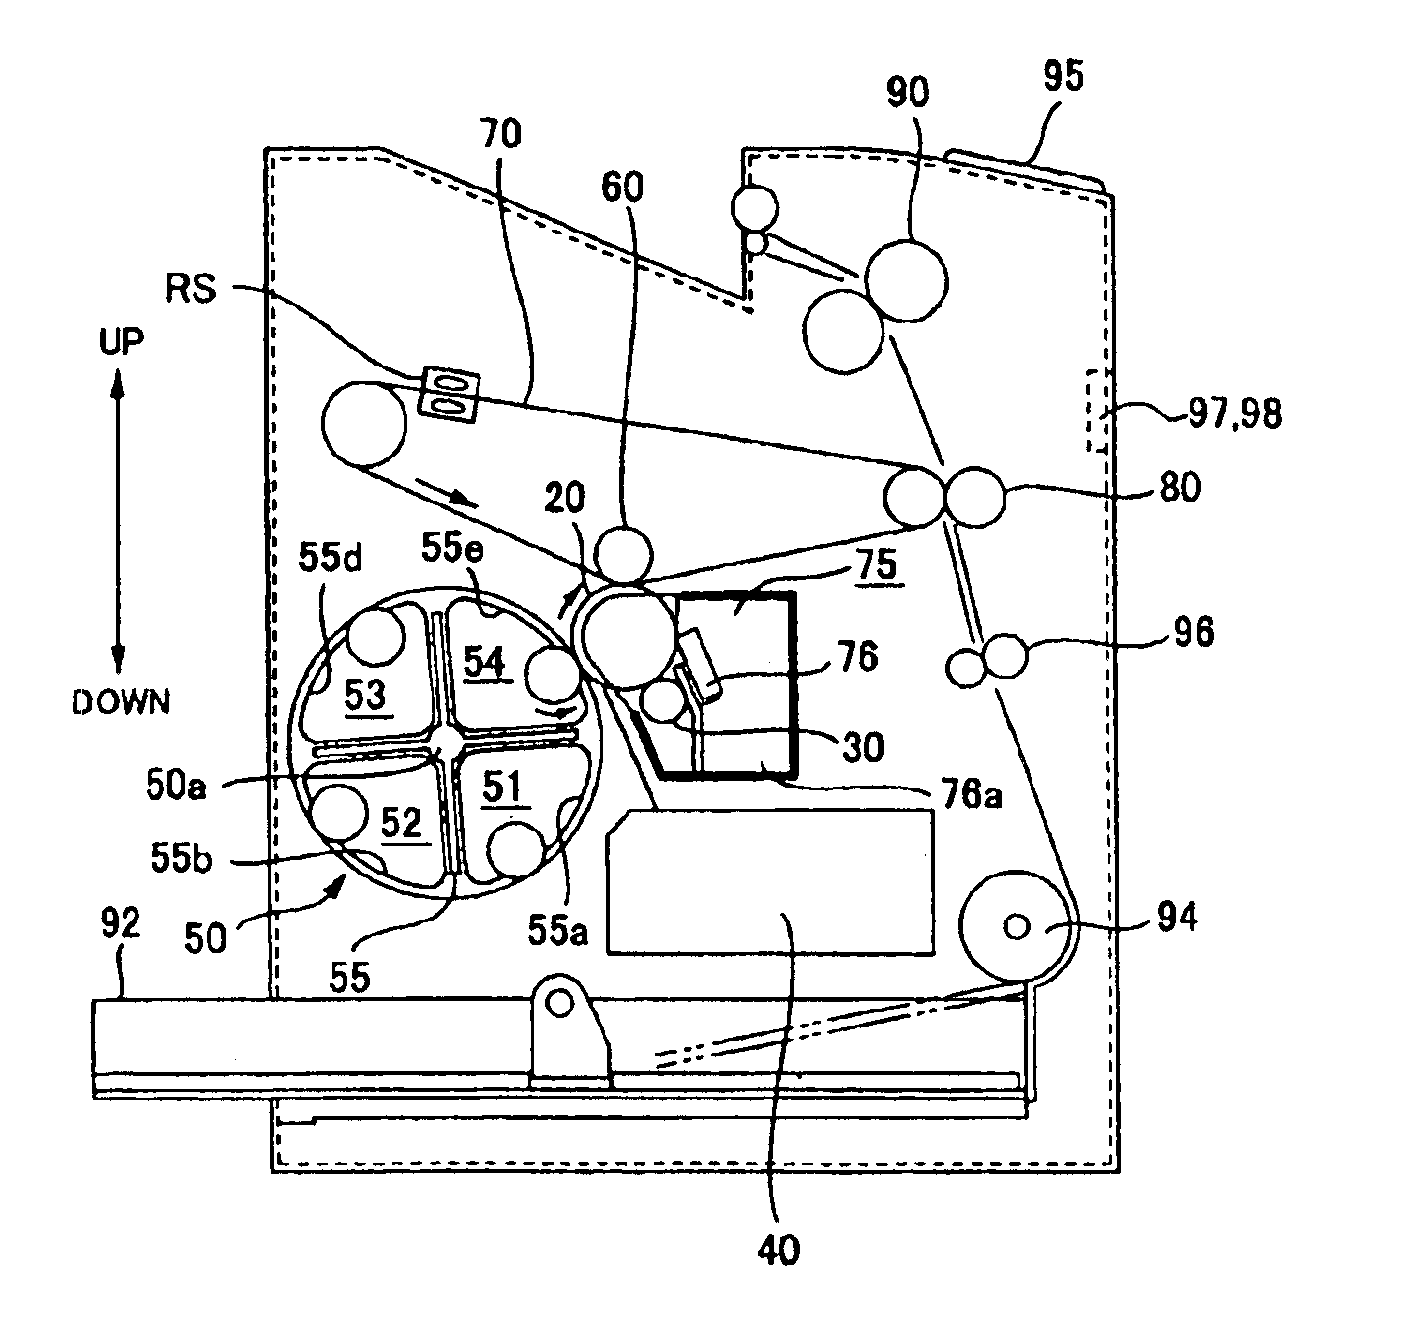 Image-forming apparatus and computer system